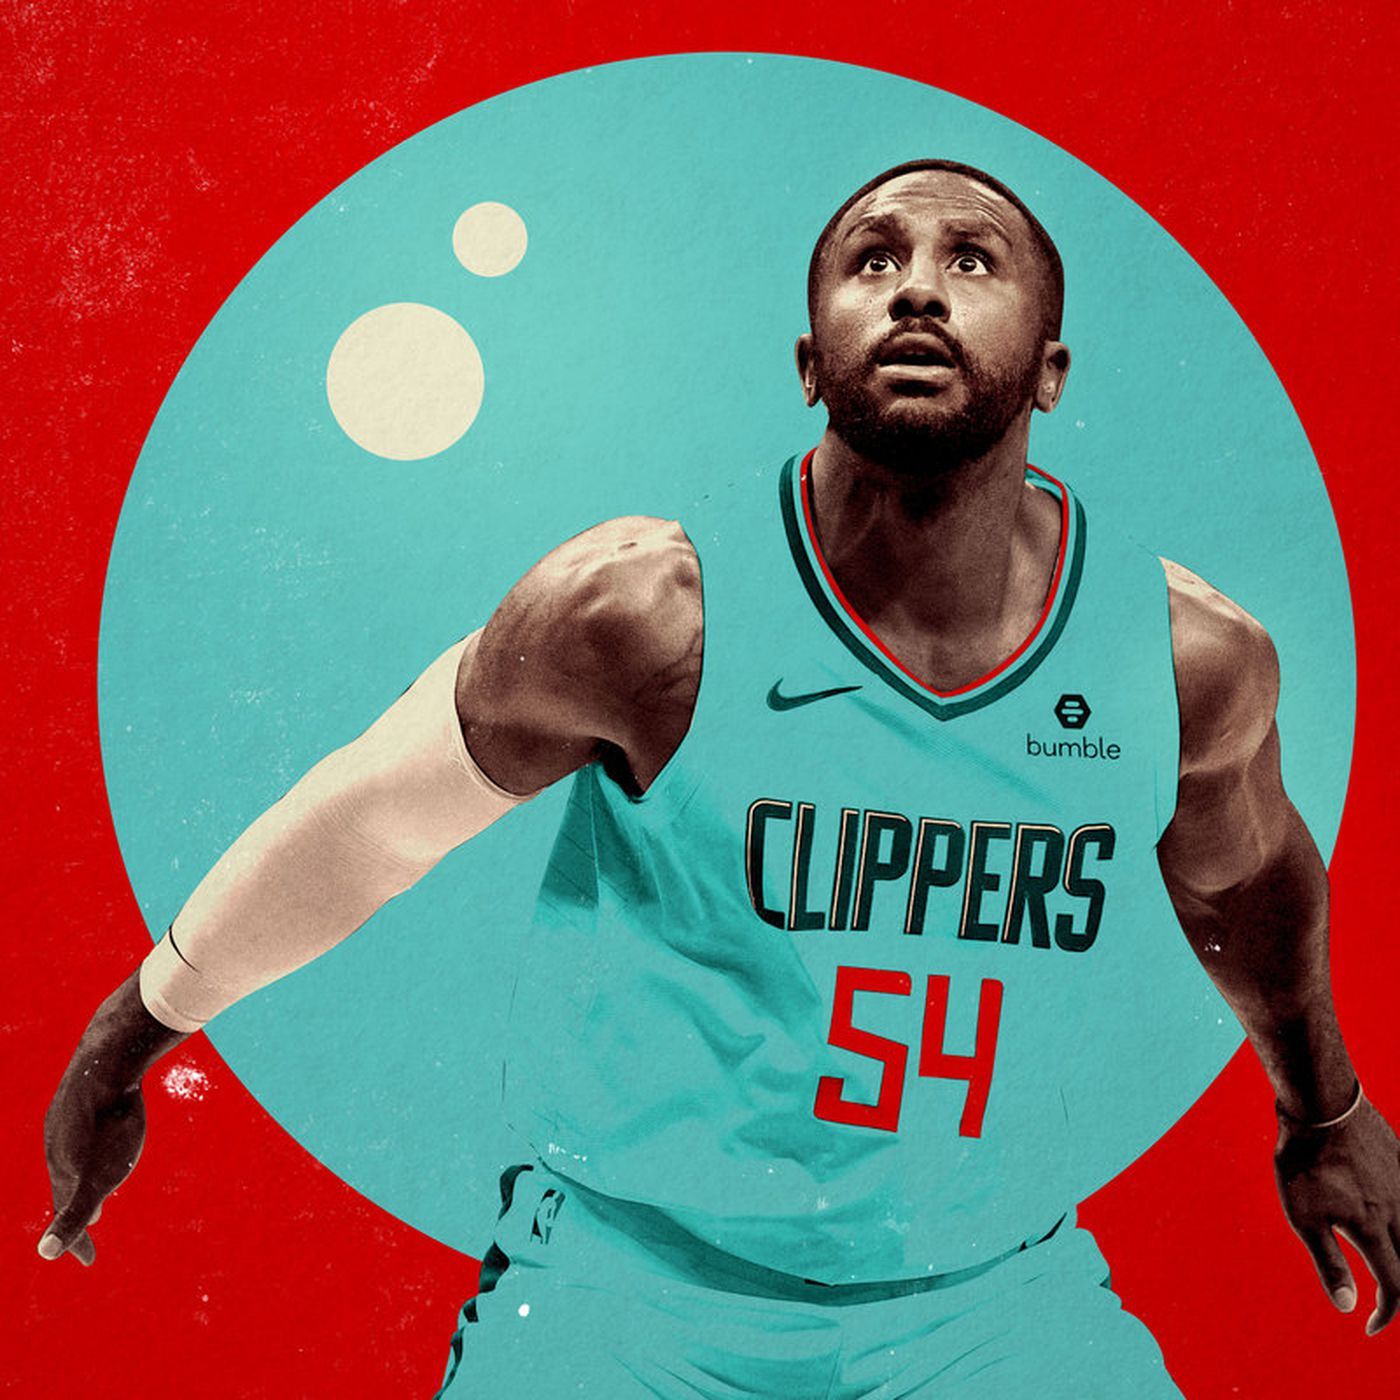 Q&A: Patrick Patterson on What It's Like Inside the NBA's Bubble